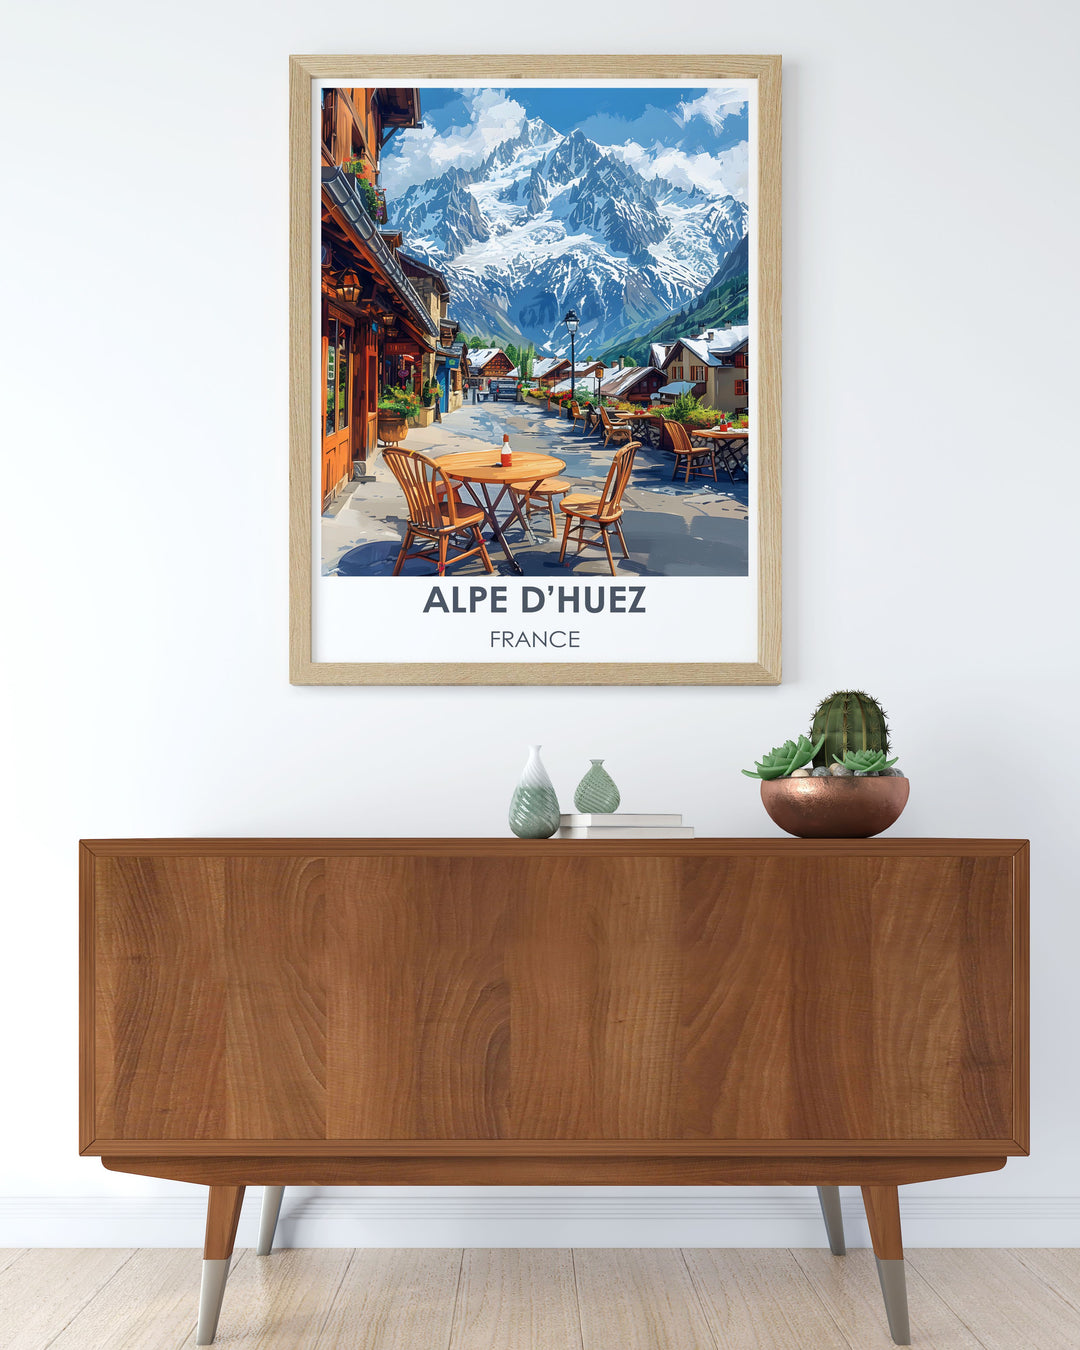 Canvas art of skiers in LAlpe dHuez, capturing the dynamic action and excitement of skiing in the French Alps.